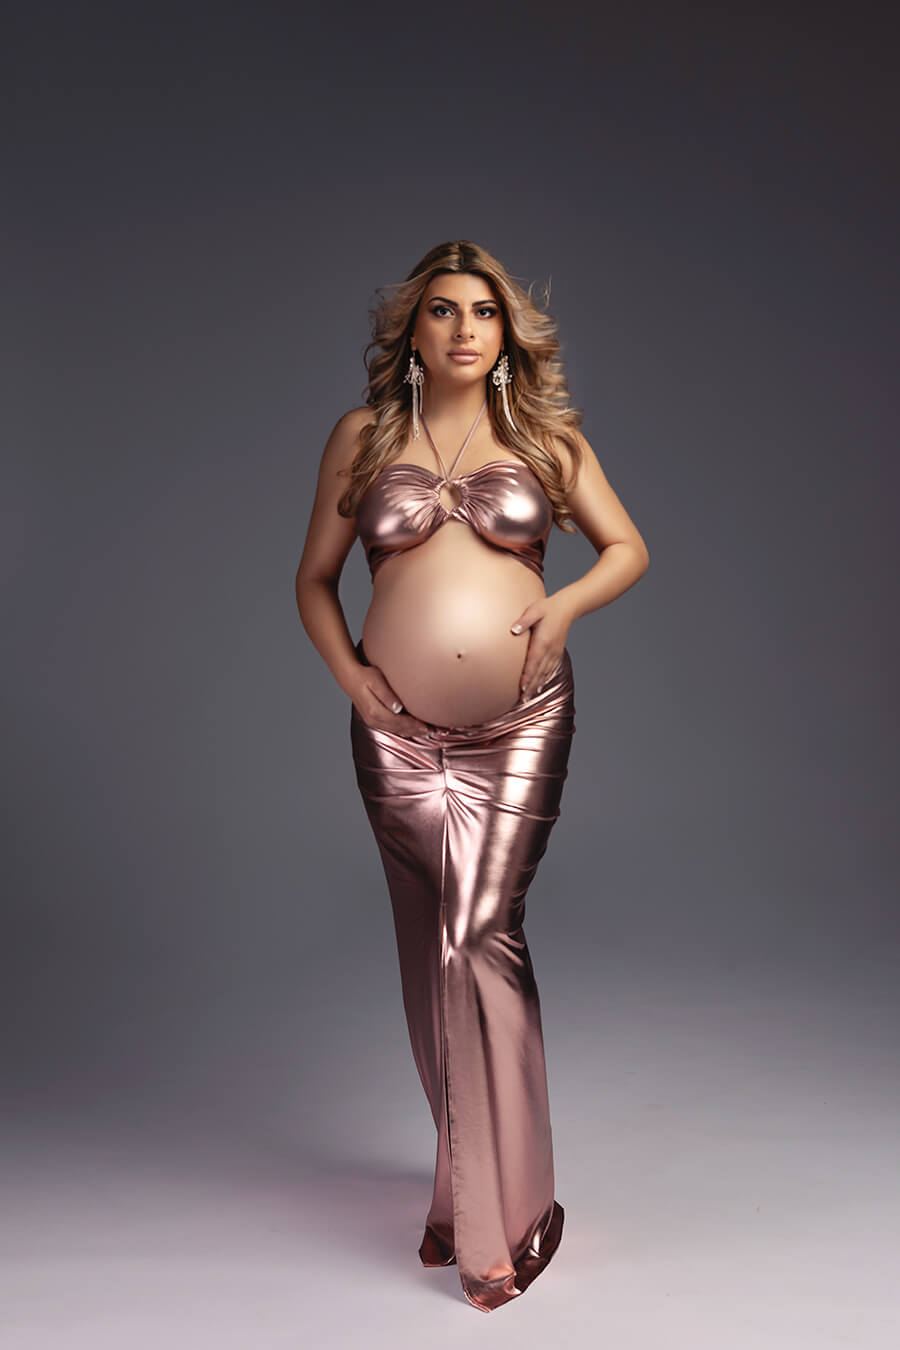 blond pregnant model poses in a studio holding gently her belly bump. she is wearing a lamee set in dusty pink color. the top has a keyhole peekaboo detail and the skirt is tight